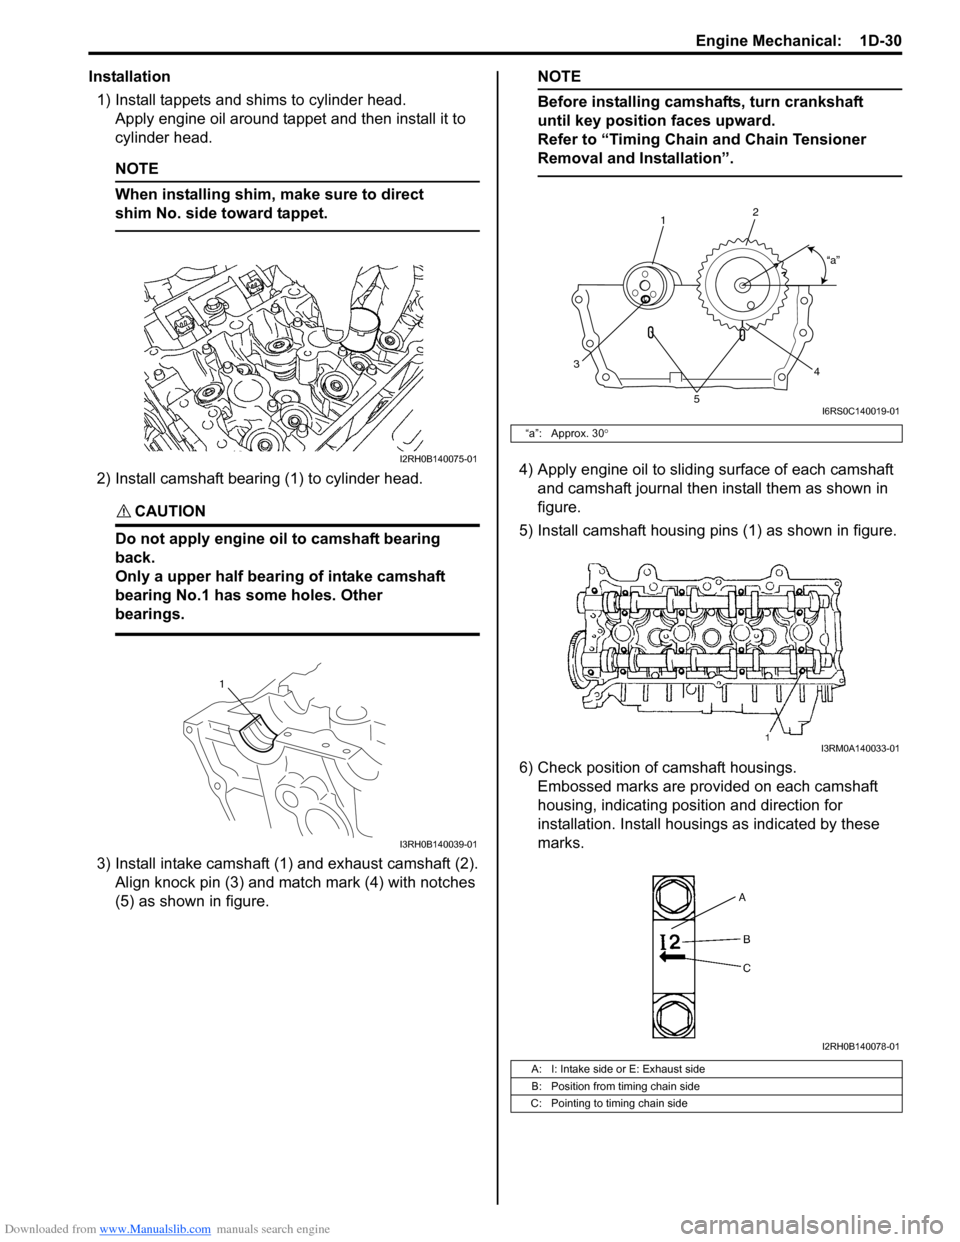 SUZUKI SWIFT 2007 2.G Service Workshop Manual Downloaded from www.Manualslib.com manuals search engine Engine Mechanical:  1D-30
Installation1) Install tappets and shims to cylinder head. Apply engine oil around tappet and then install it to 
cyl